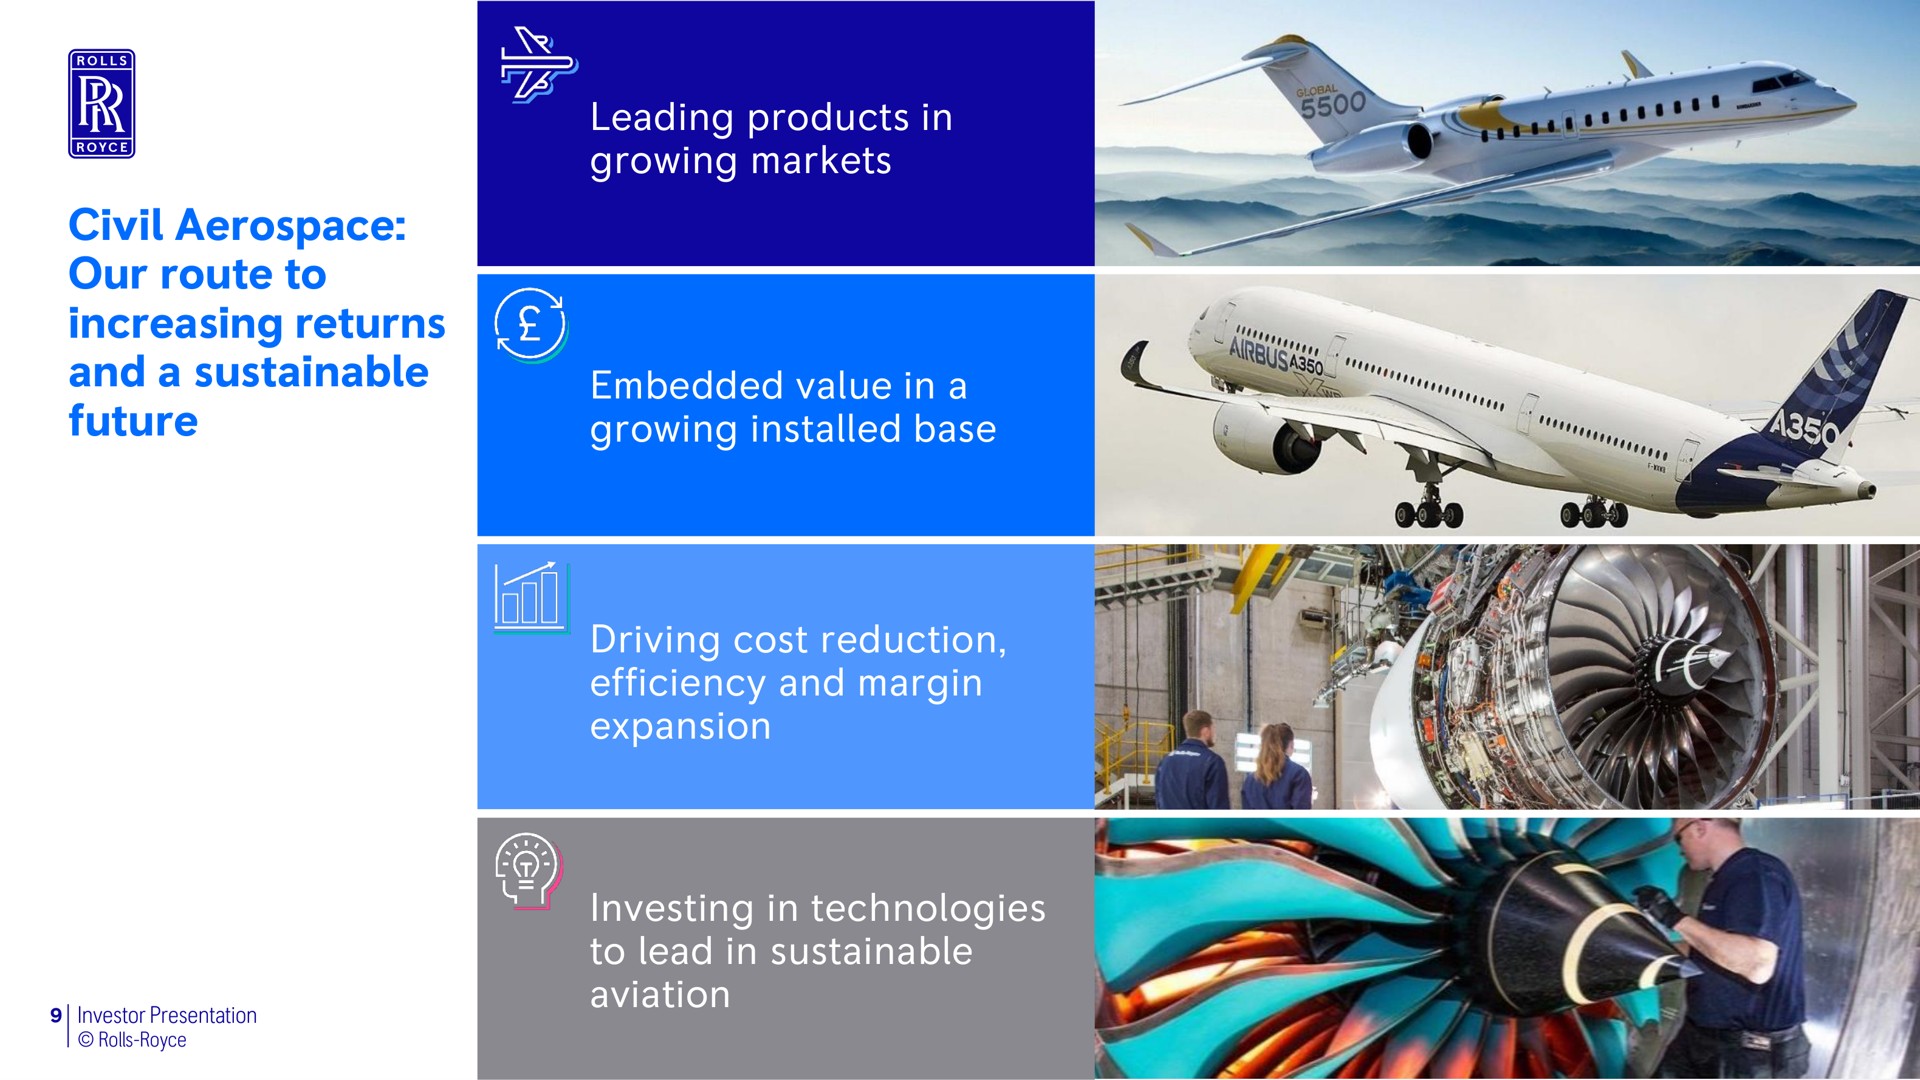 civil our route to increasing returns and a sustainable future leading products in growing markets embedded value in a growing base driving cost reduction efficiency and margin expansion investing in technologies to lead in sustainable aviation | Rolls-Royce Holdings